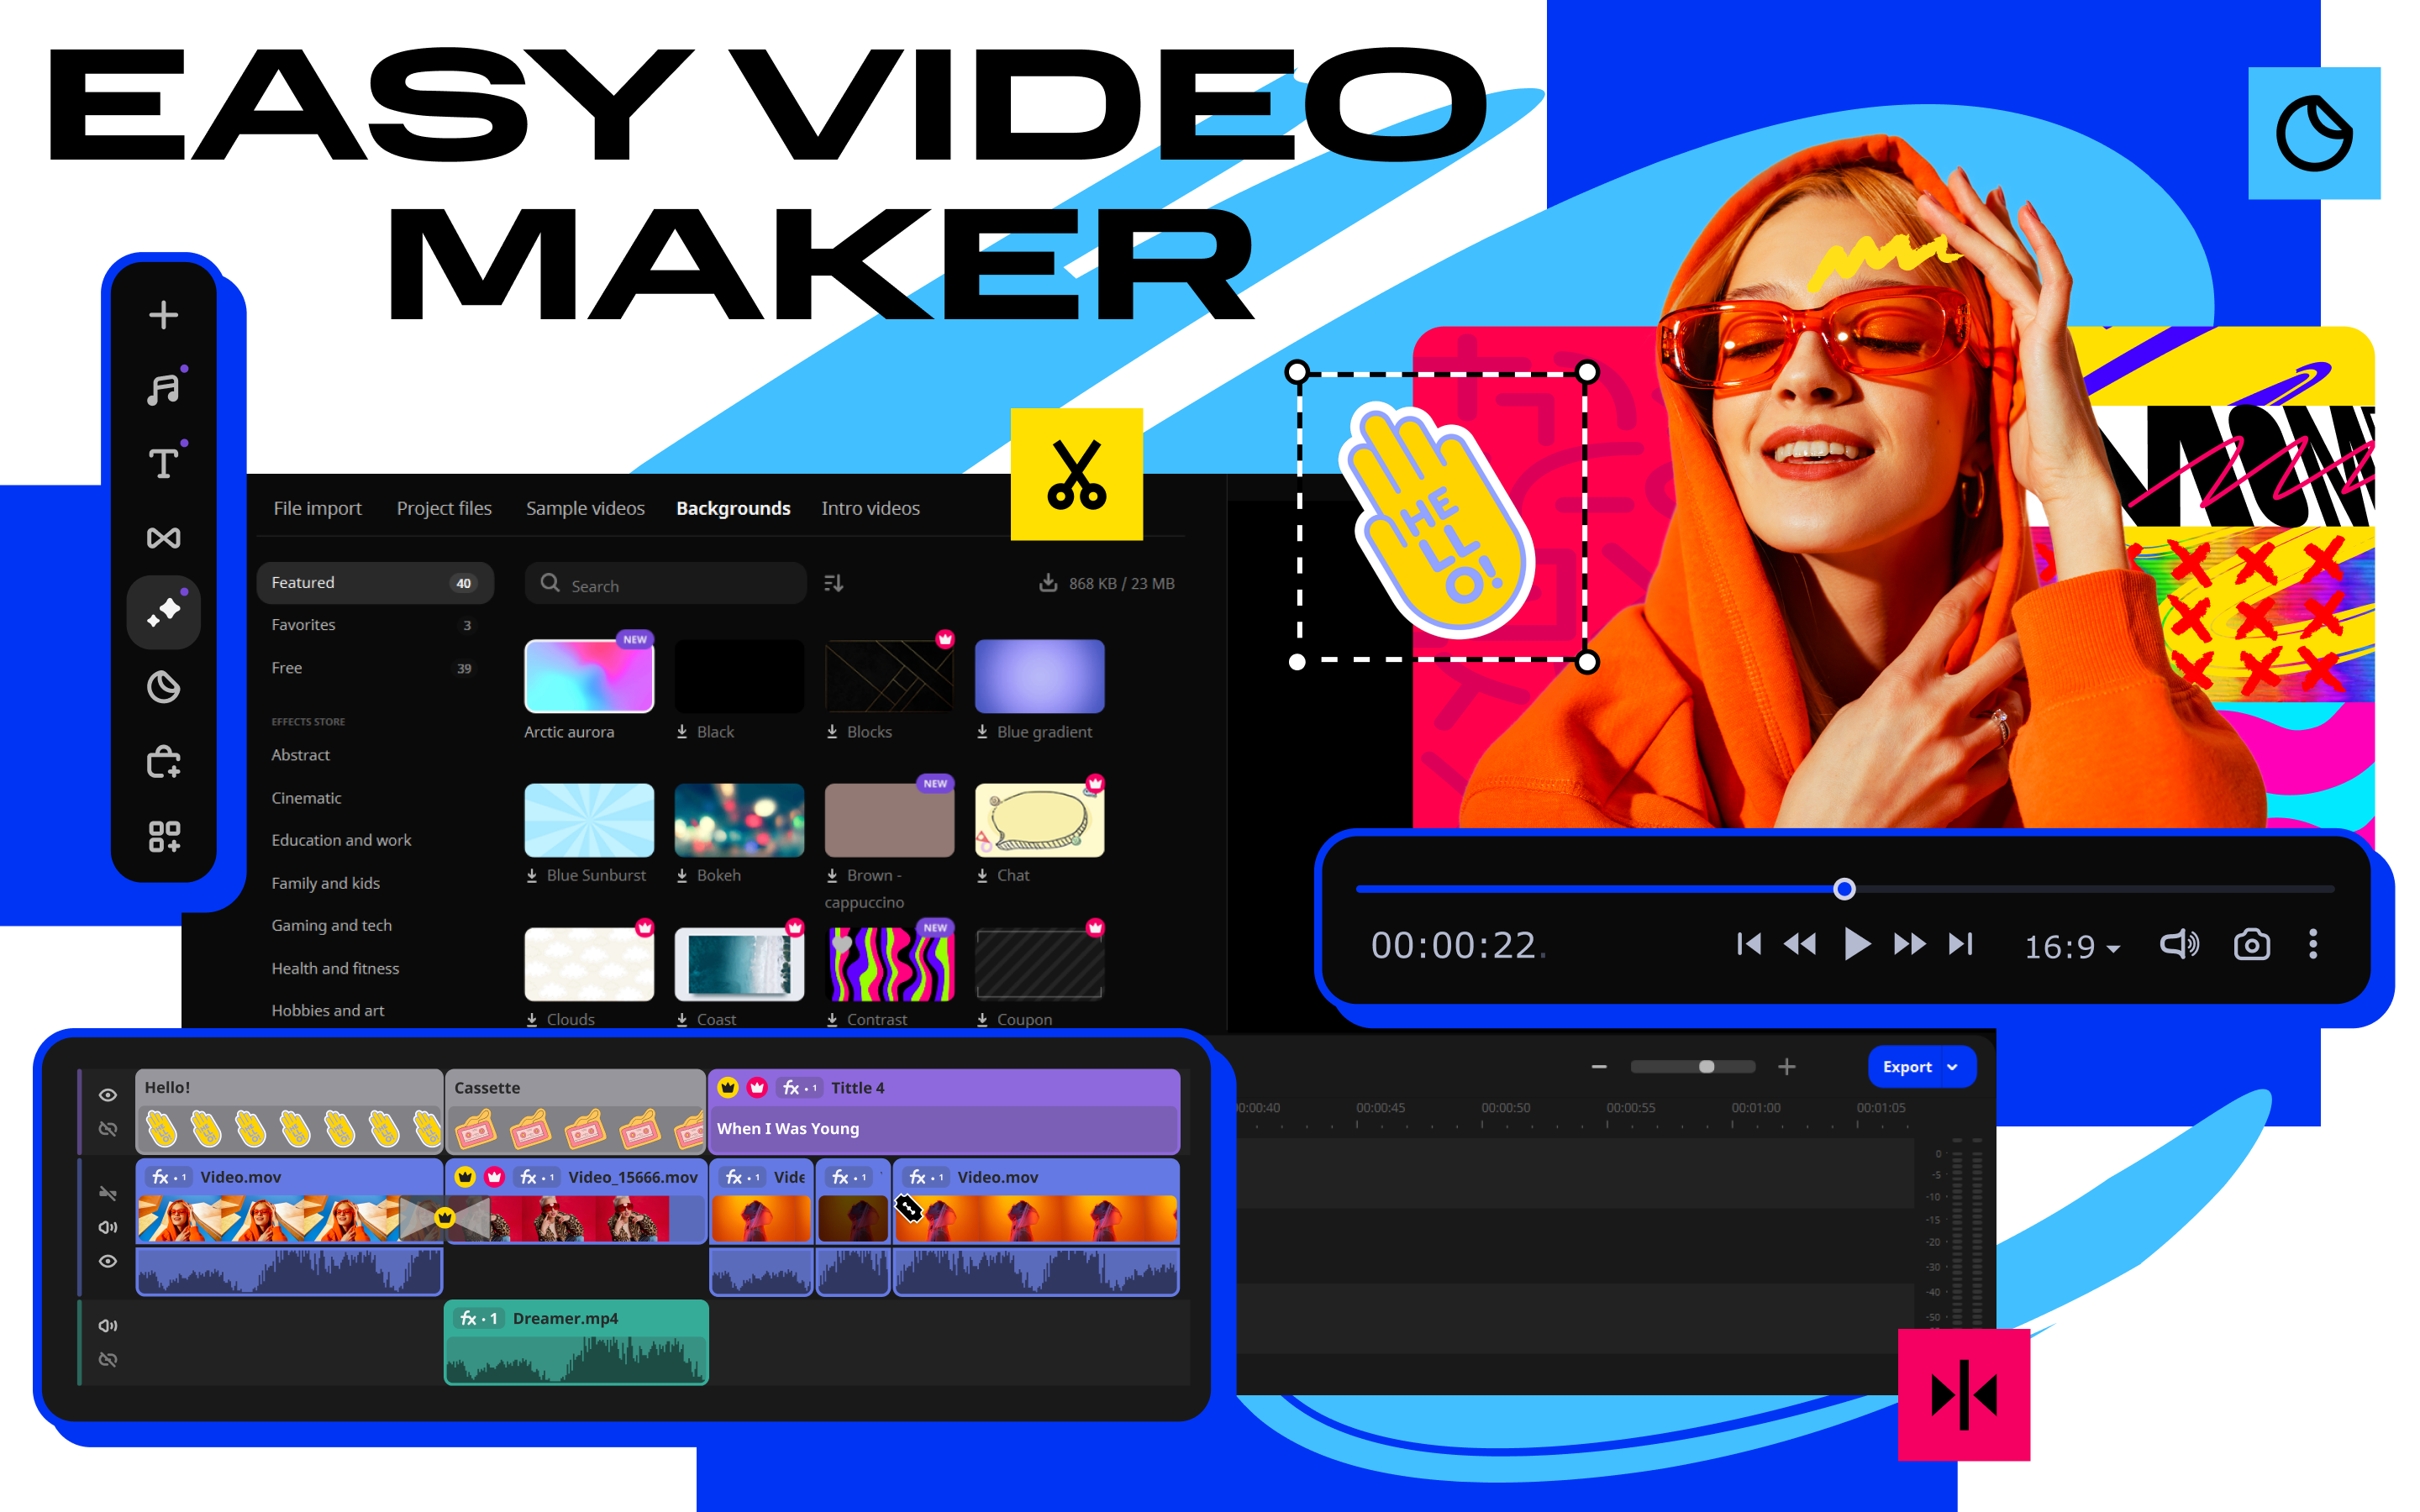 Movavi Video Editor - Cool Video Maker with Awesome Effects